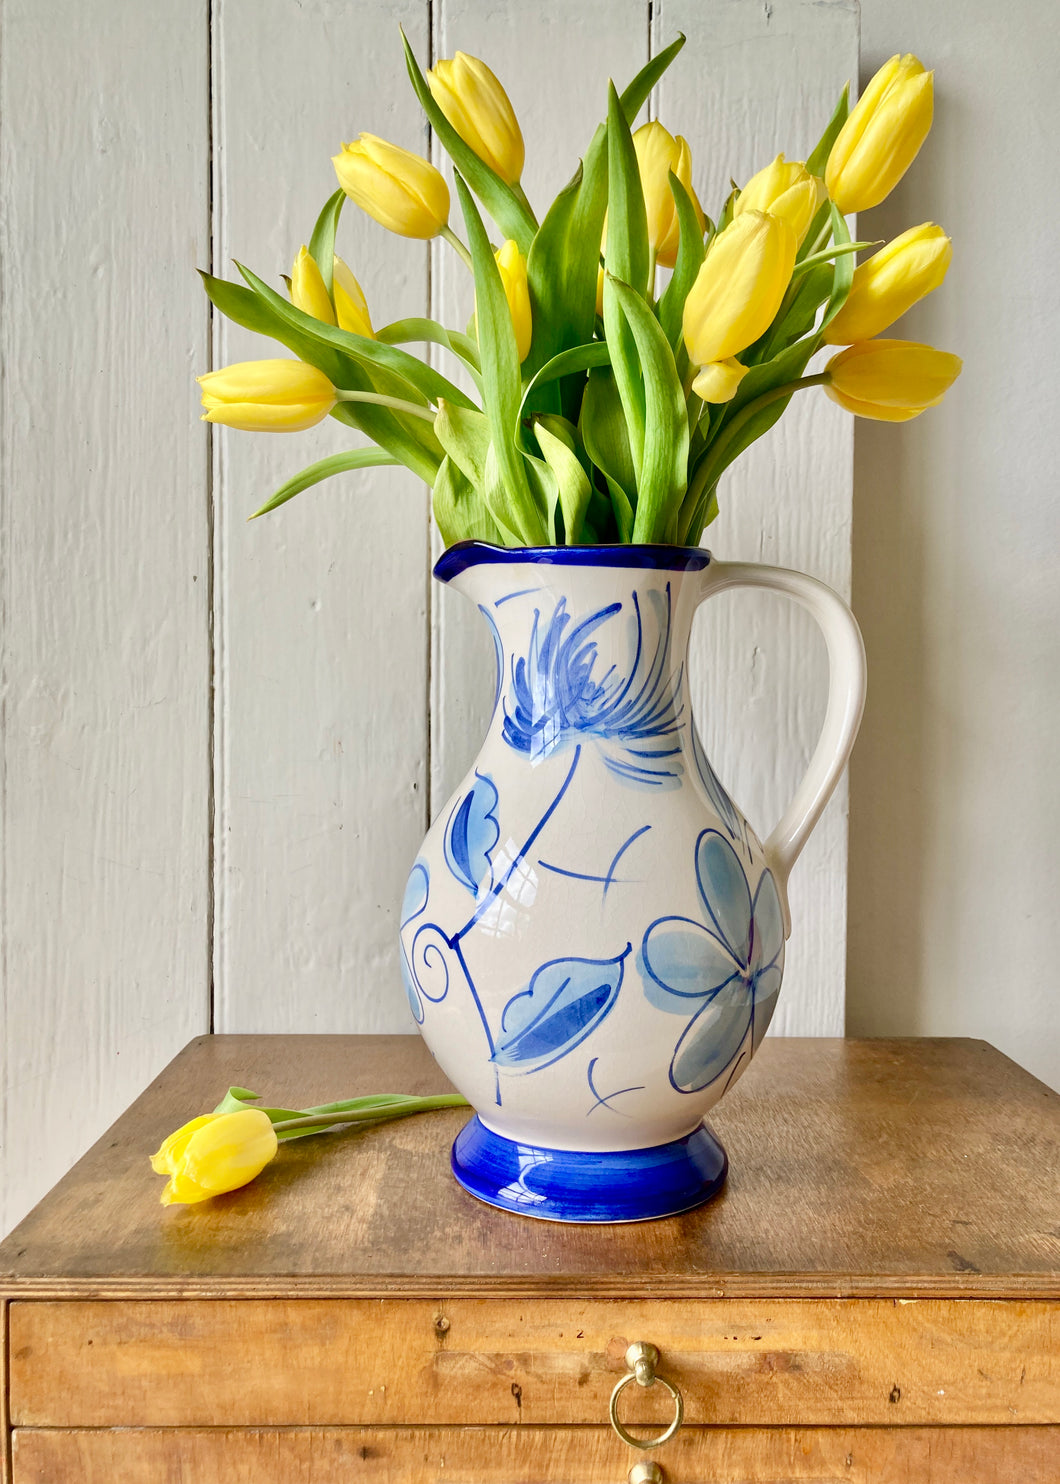 Extra large, hand-decorated floral jug